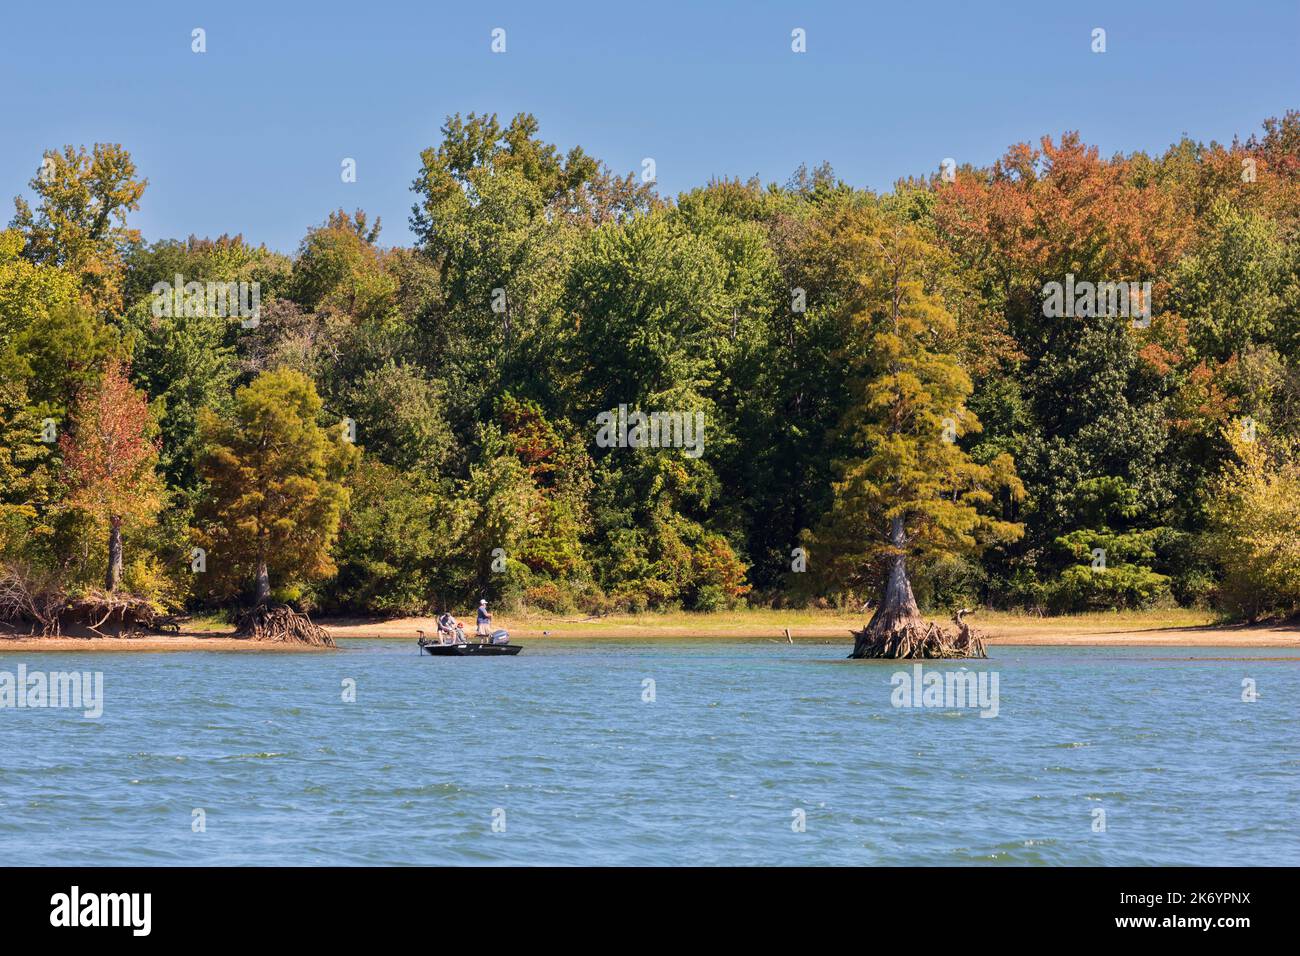 Three men fish from a small boat on Kentucky Lake in early autumn. Leaves are beginning to change colour at the beginning of October. Stock Photo